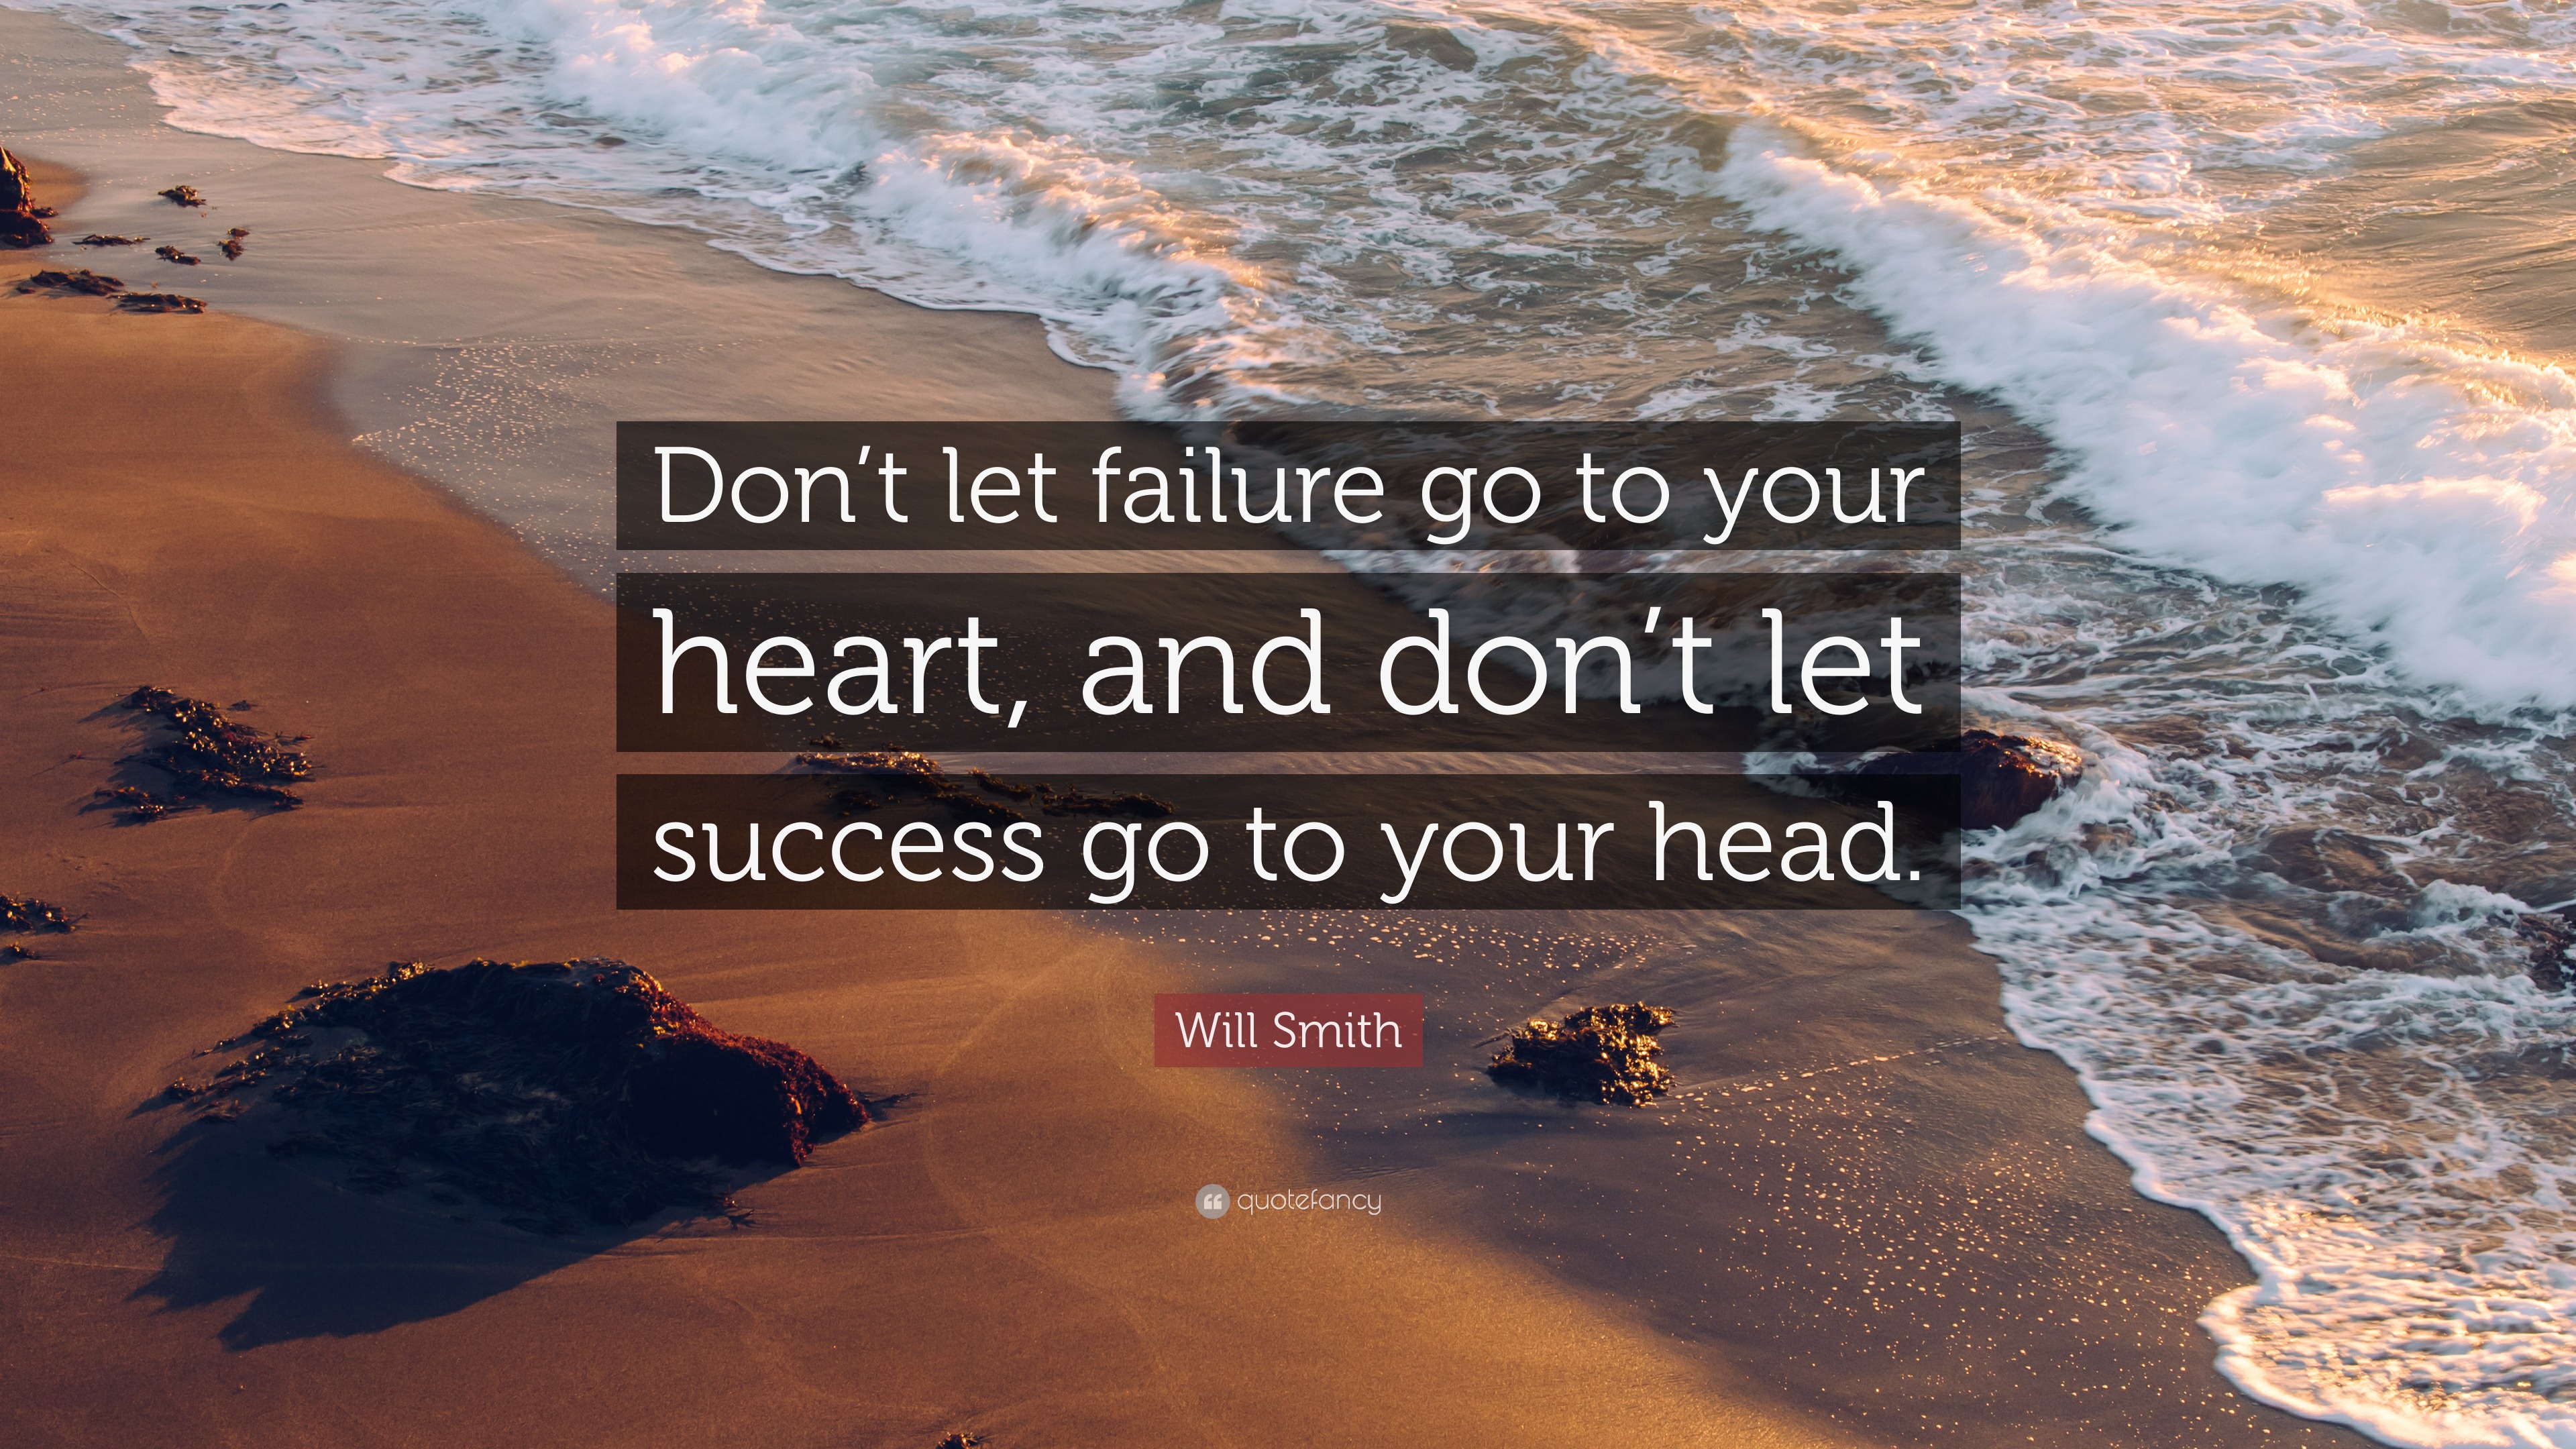 Will Smith Quote Don T Let Failure Go To Your Heart And Don T Let Success Go To Your Head 12 Wallpapers Quotefancy